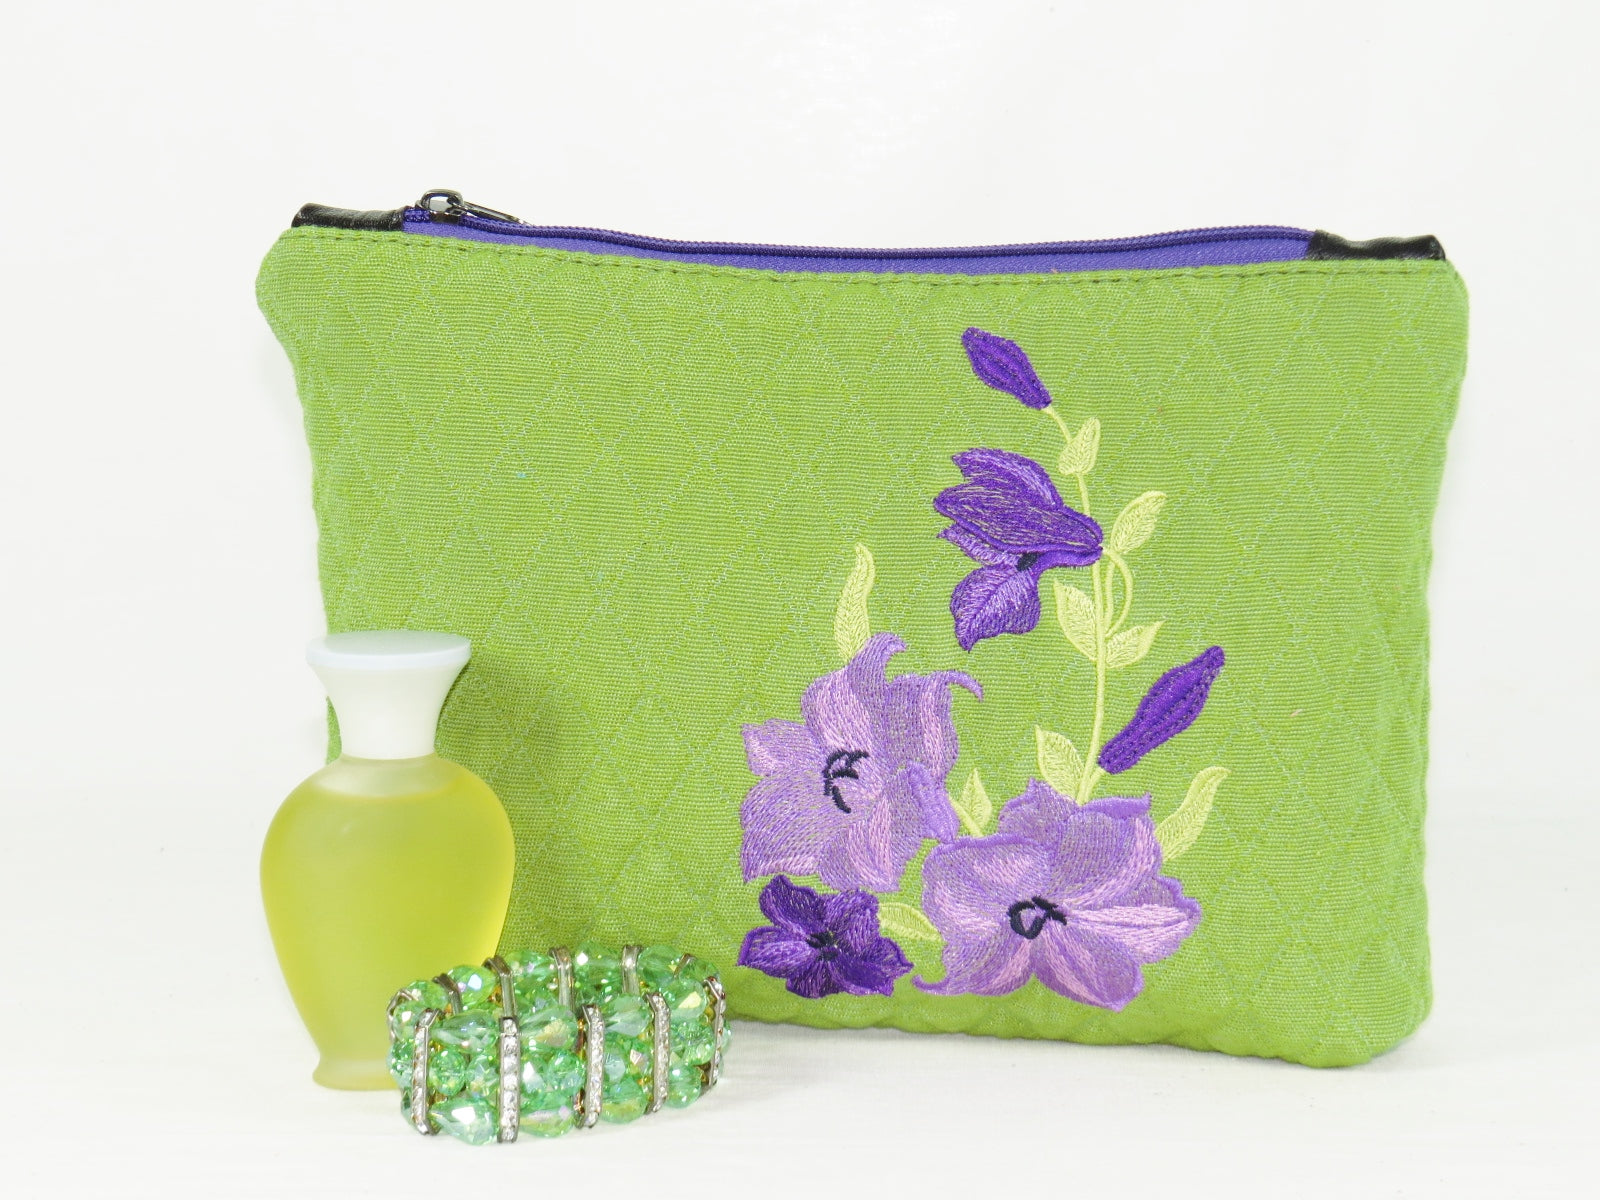 Embroidered Purple Flowers on Green Zipper Pouch vignette